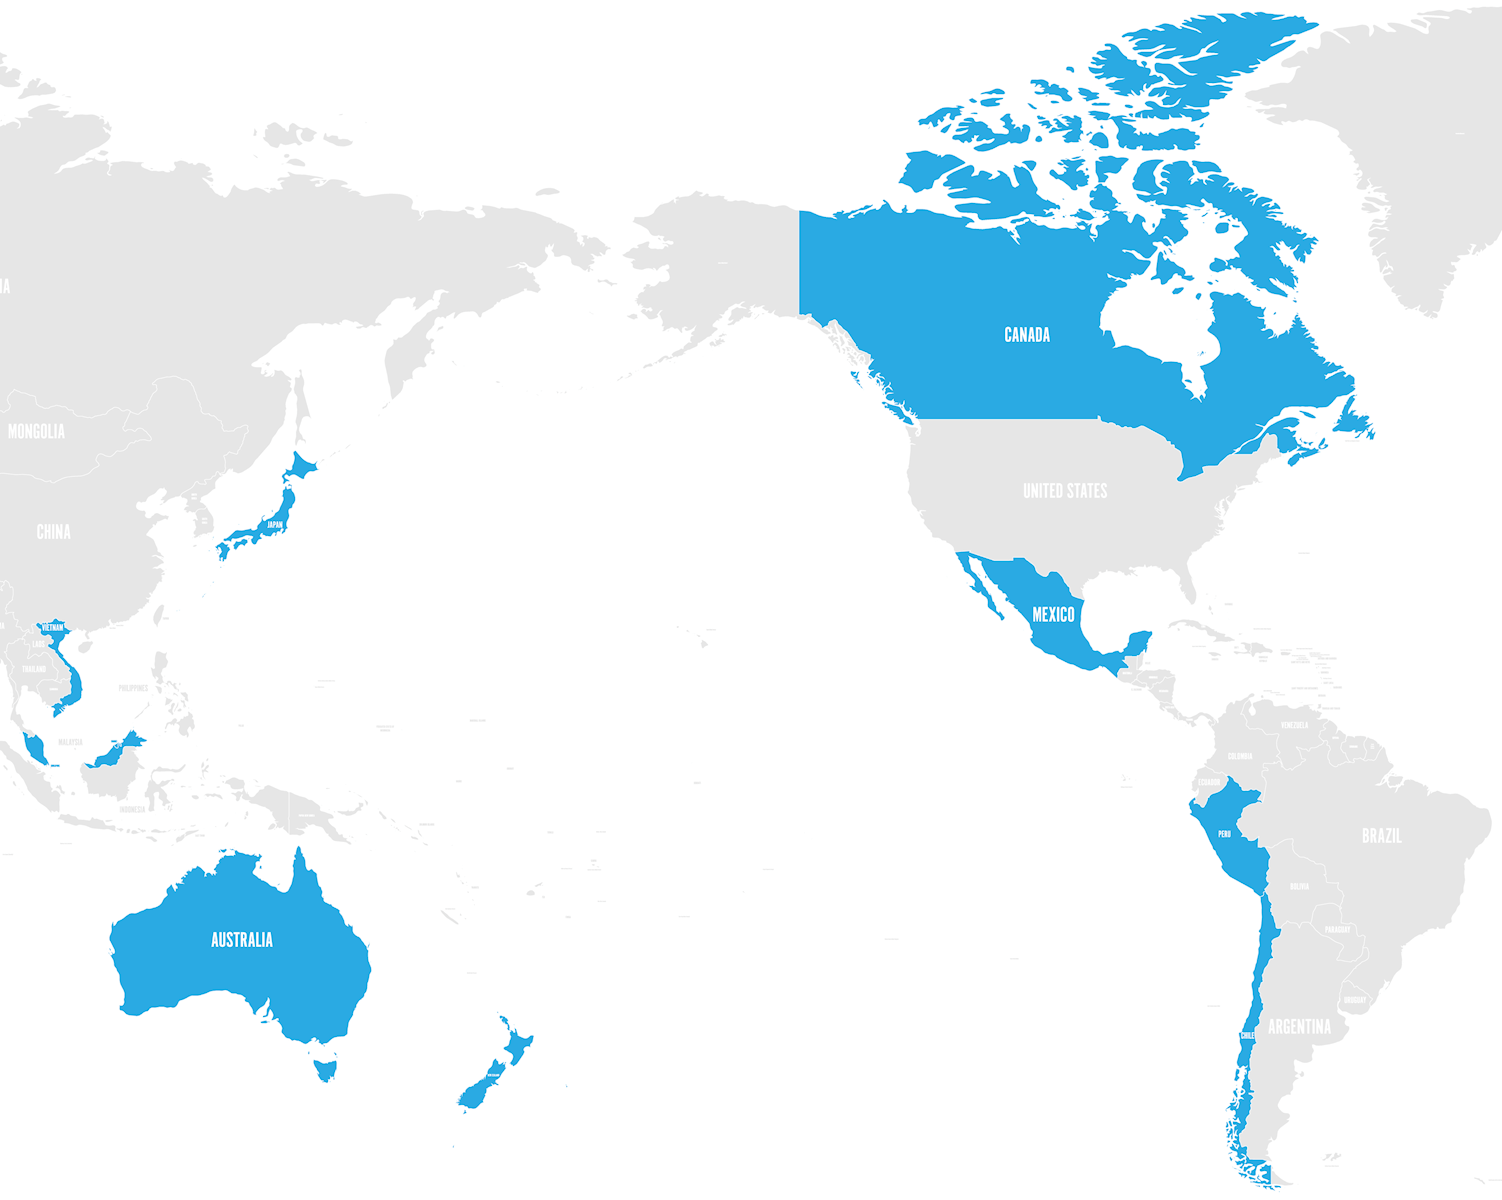 a map showing the CPTPP members